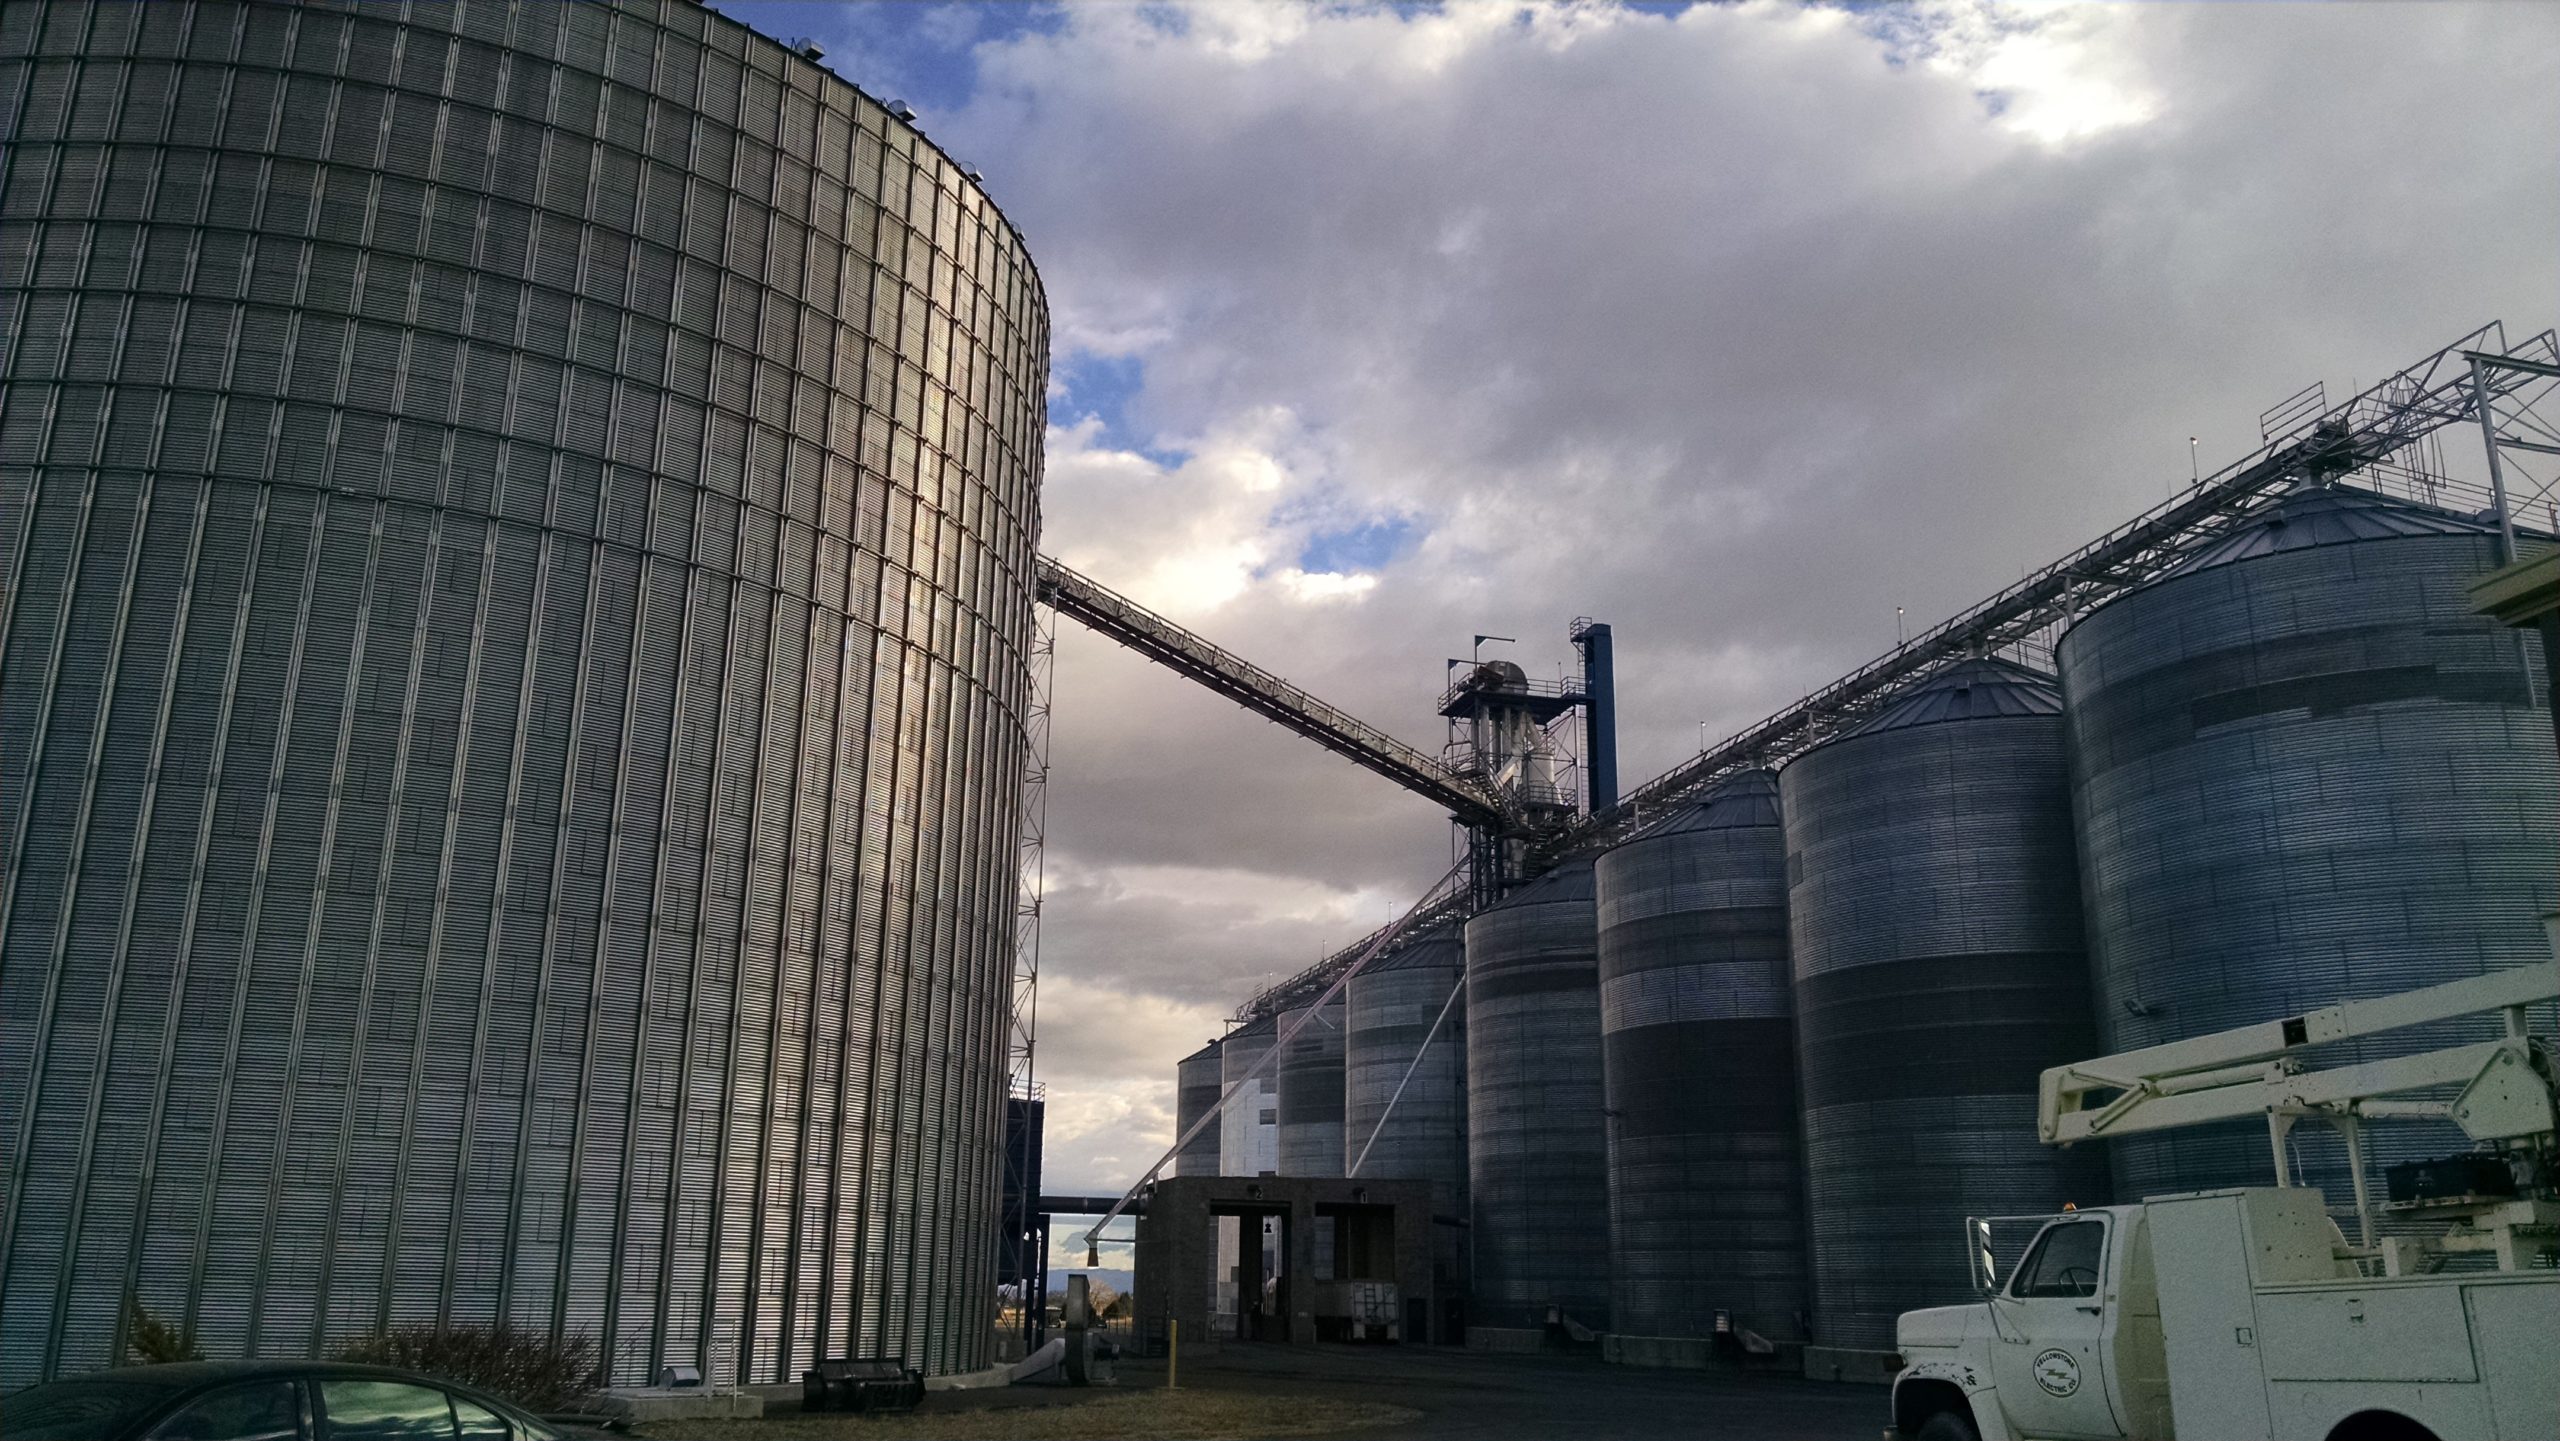 The bin on the left holds 800,000 bushels of barely--you do the math!